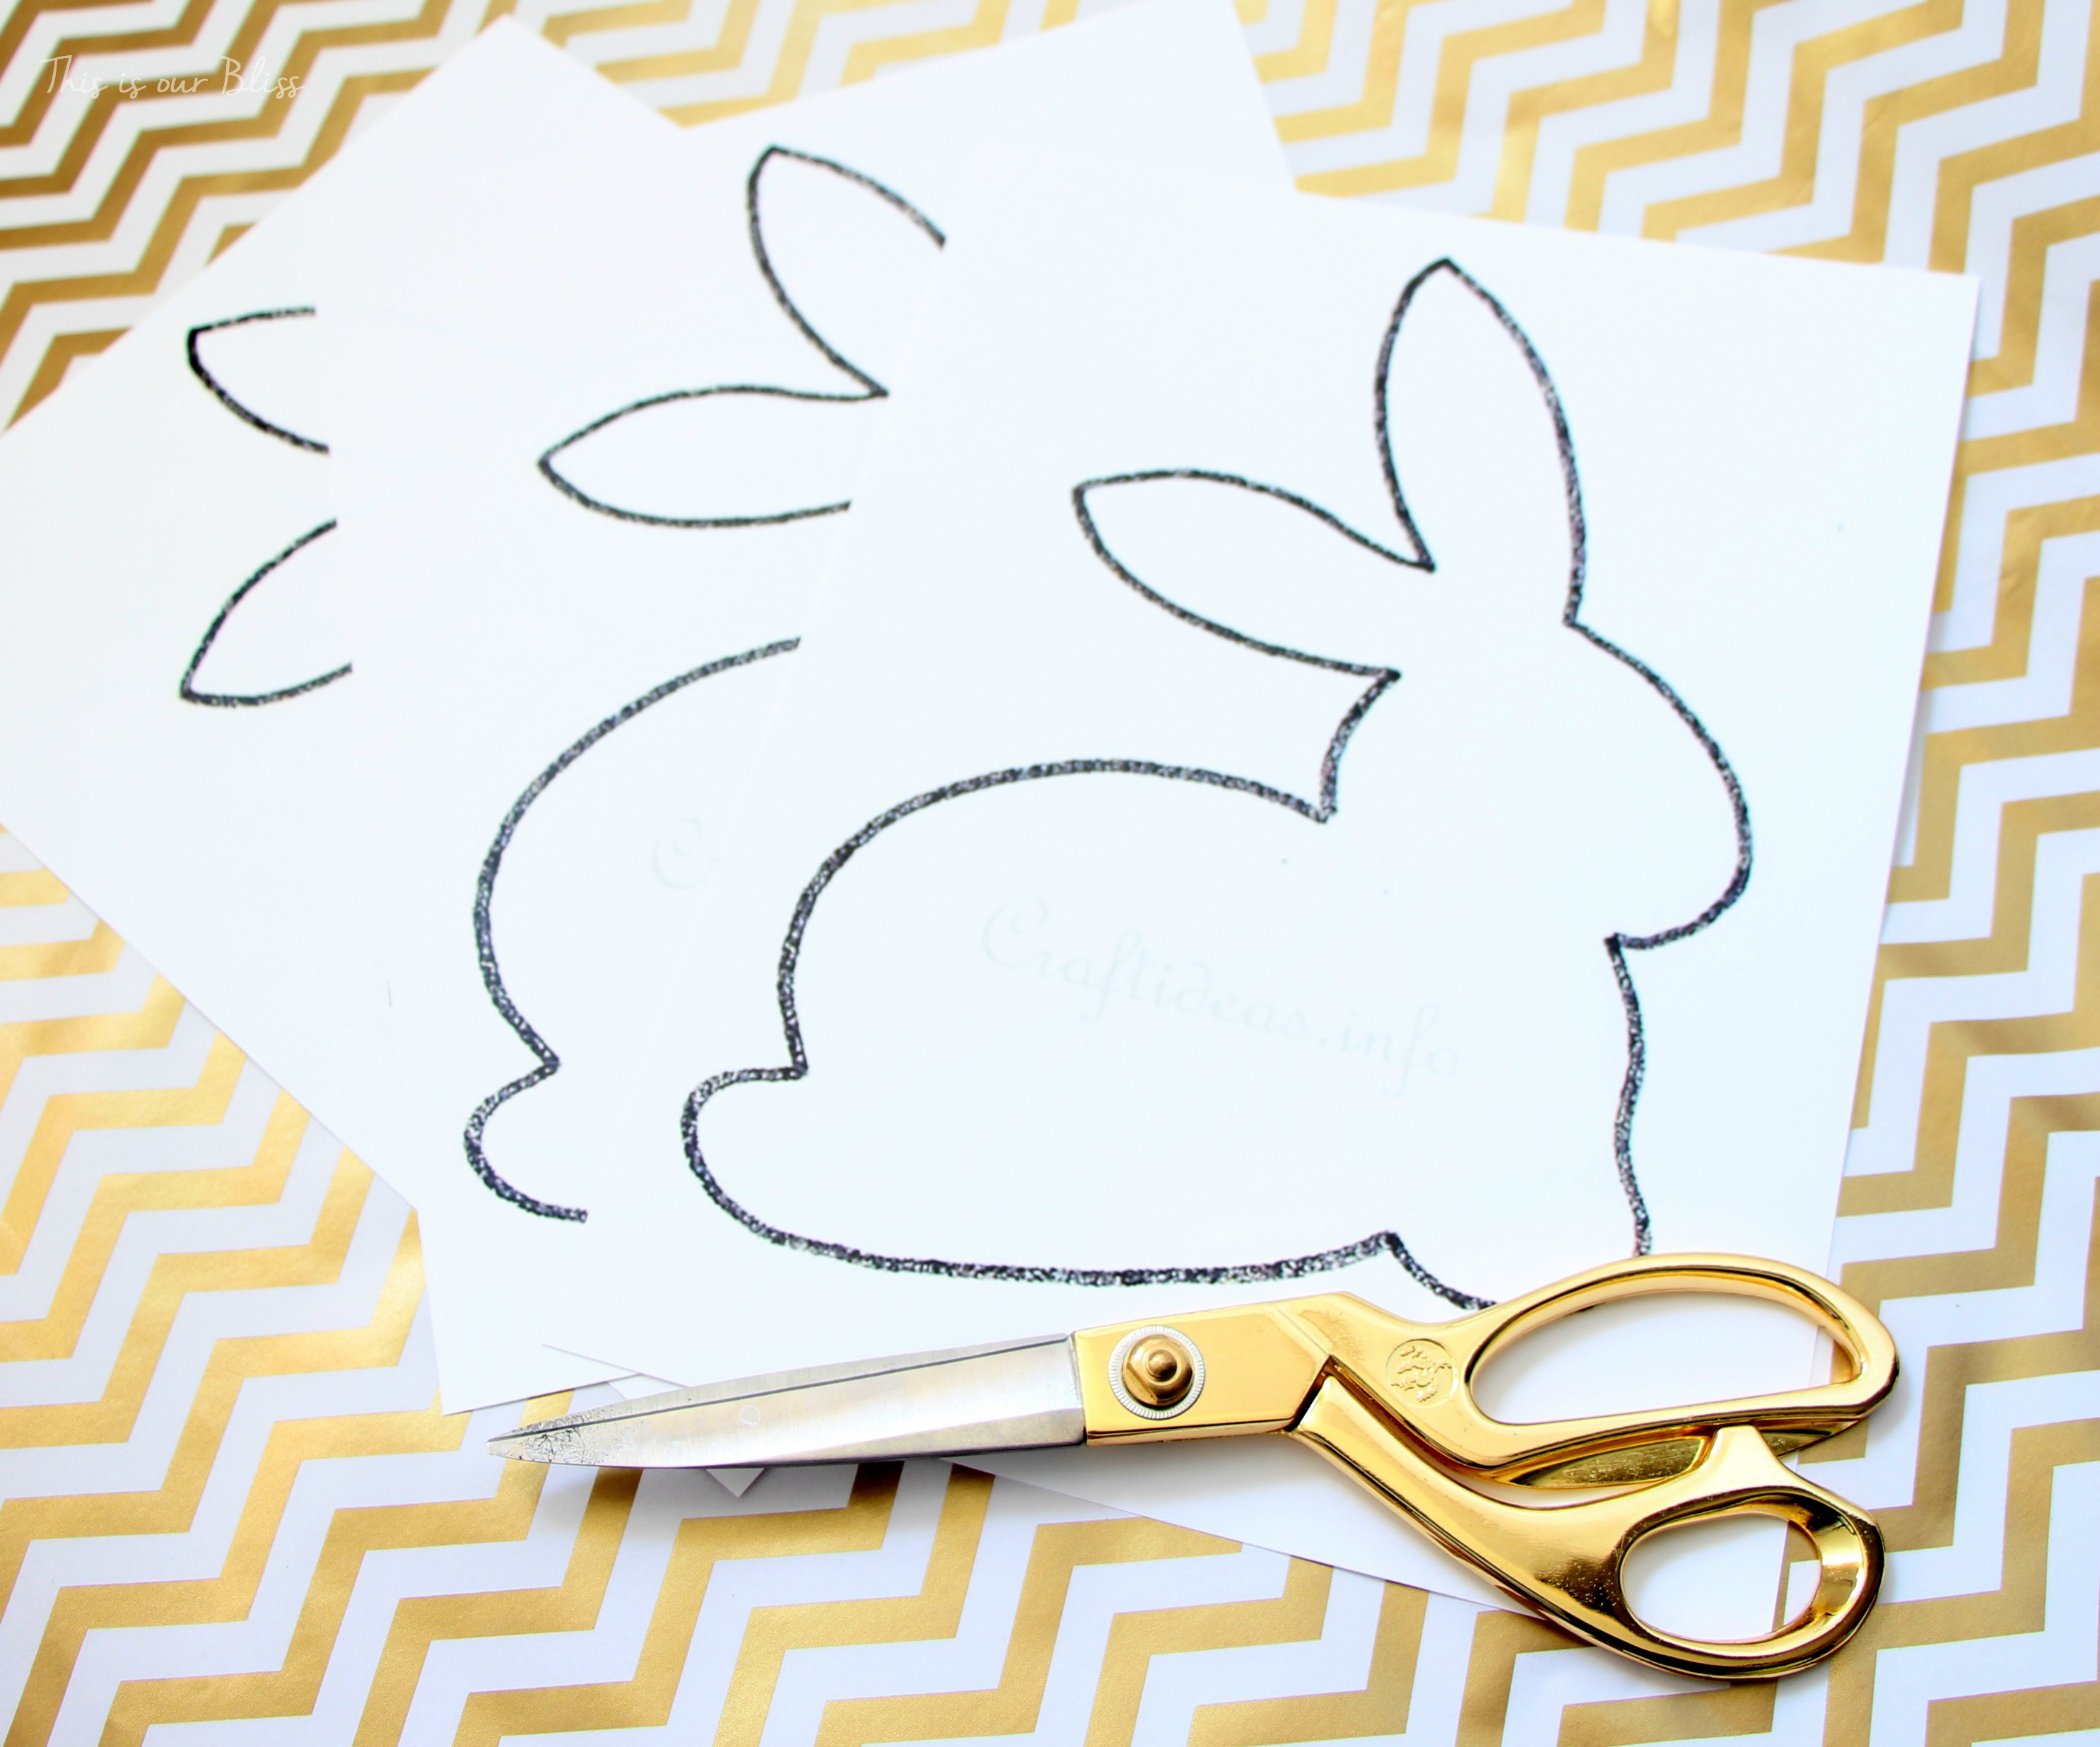 Bunny printable - cut out to use as a stencil - DIY Chic Easter art - black white and gold - This is our Bliss